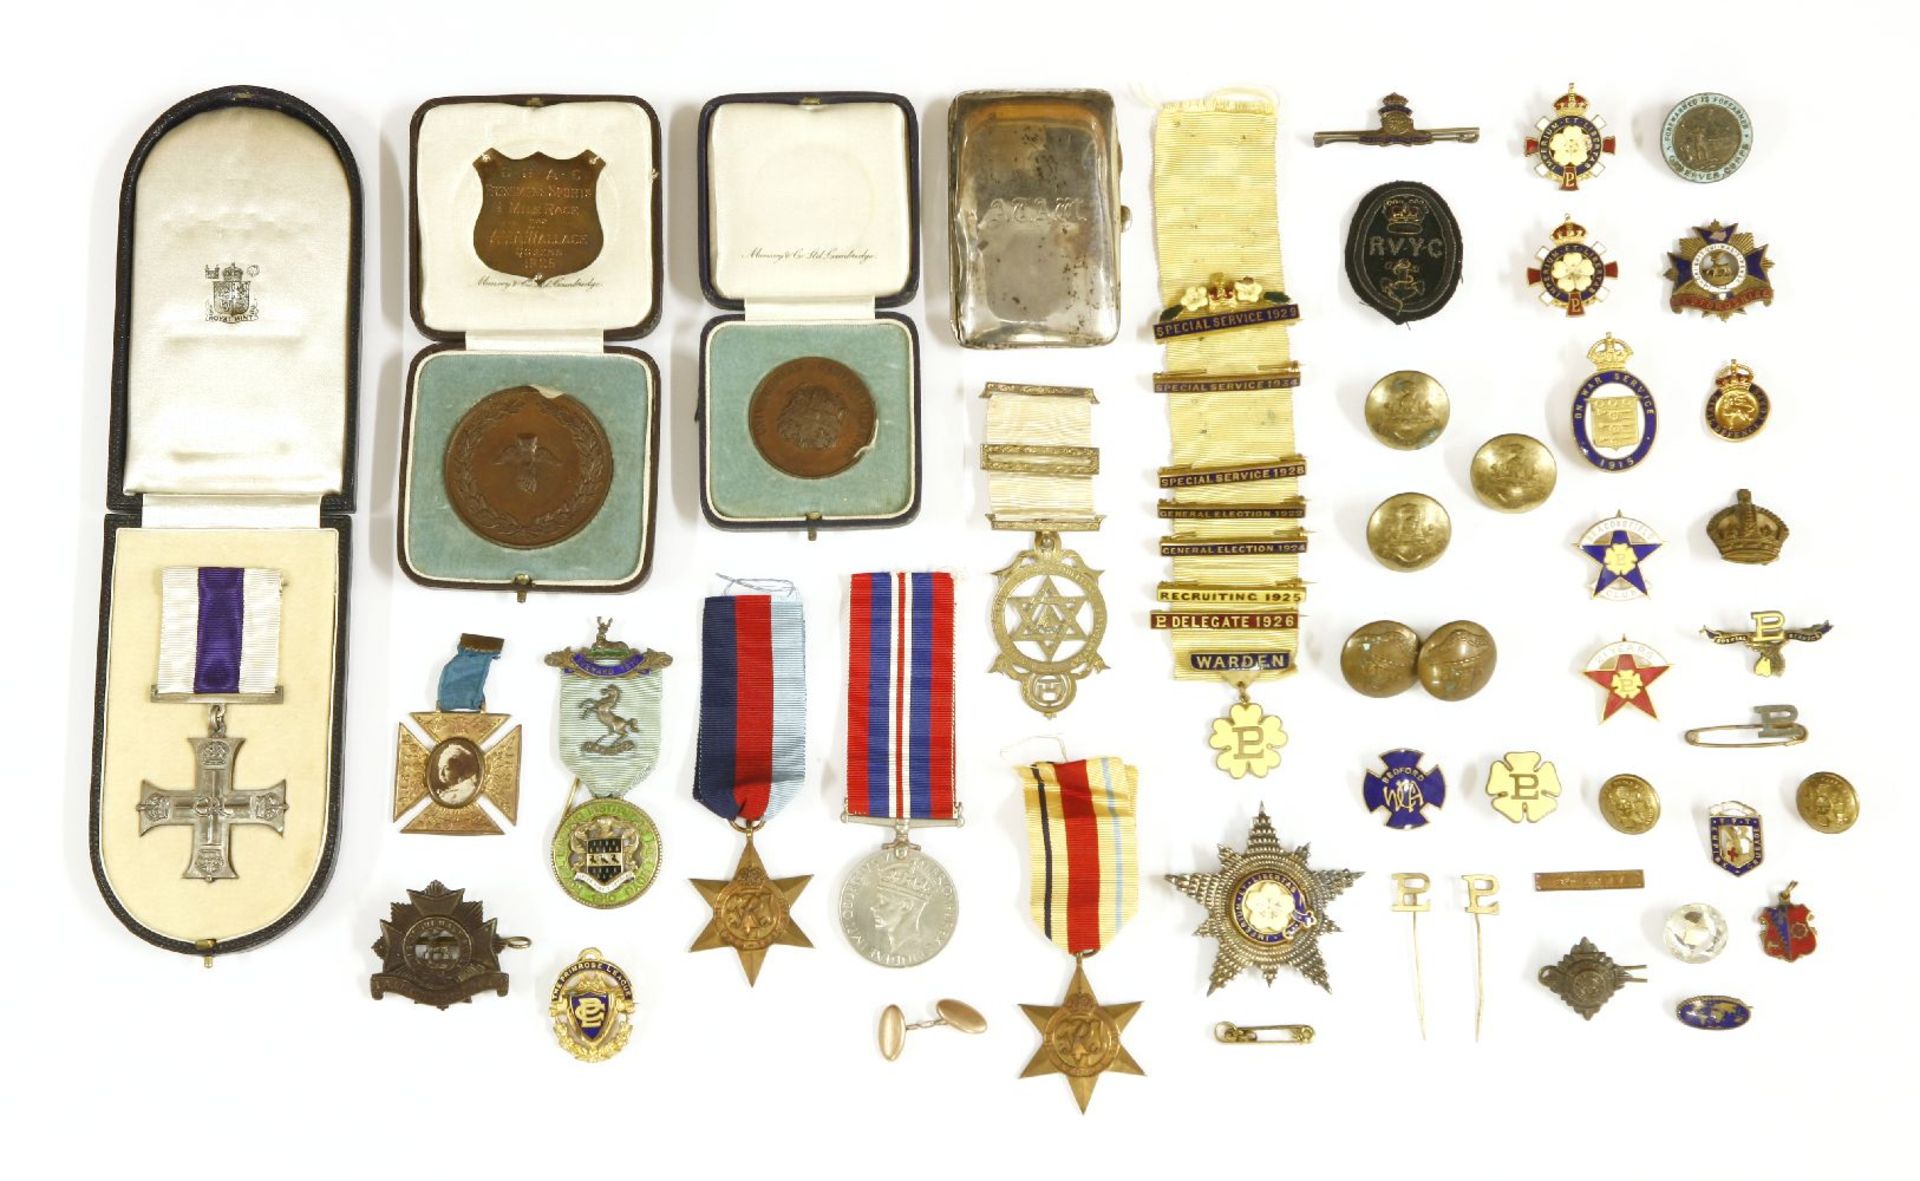 A World War II Military Cross group of four medals,to Major Alfred Thomas Alexander Wallace, the